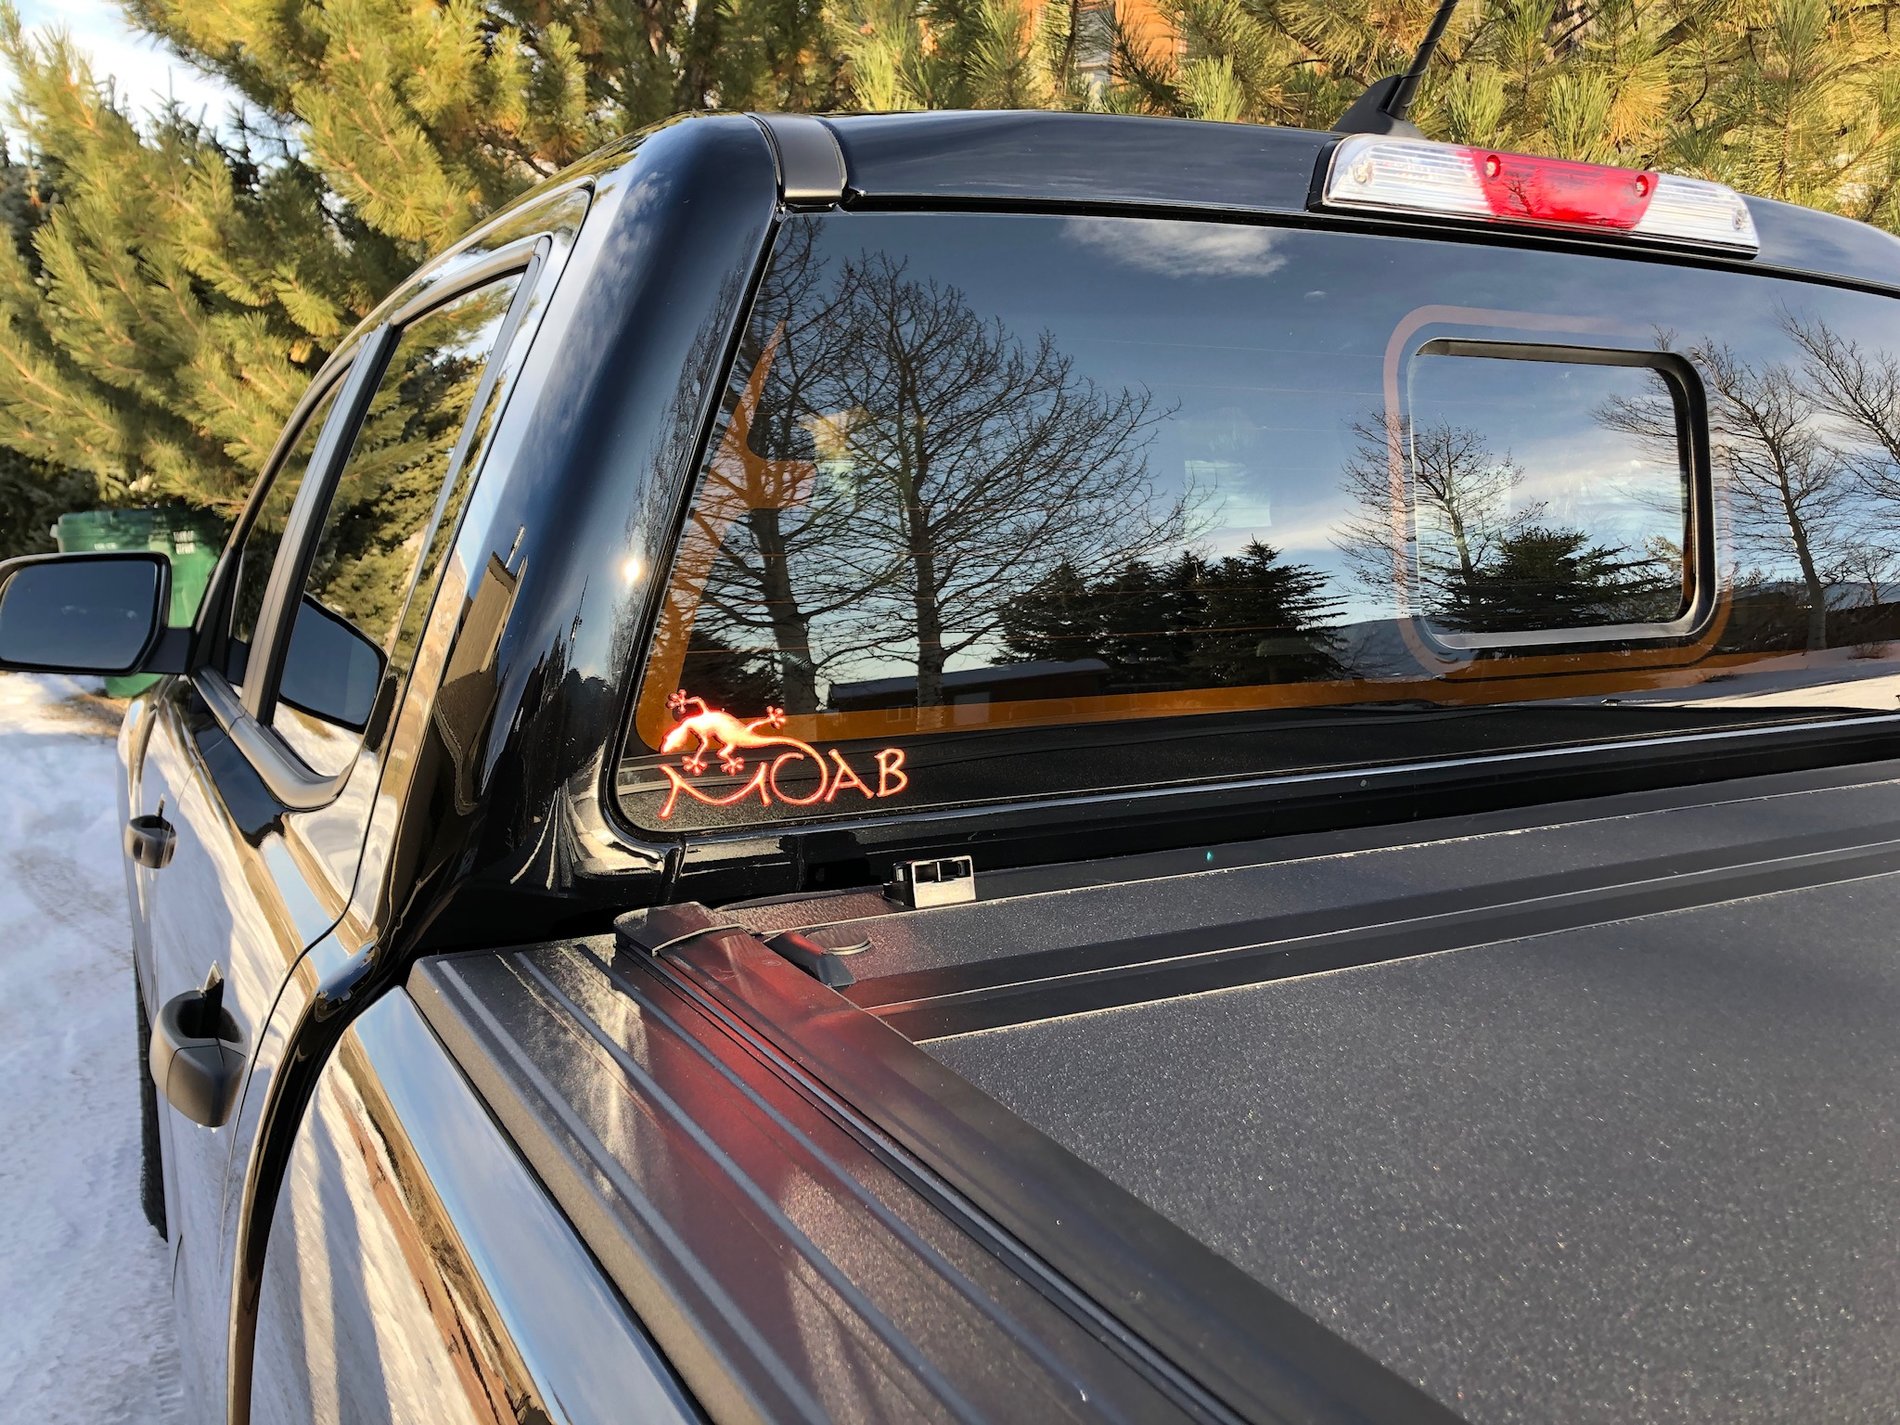 Ford Ranger Lets see those Cab window decals!! 07885B73-9E17-4E64-A784-2C2C49BE3308